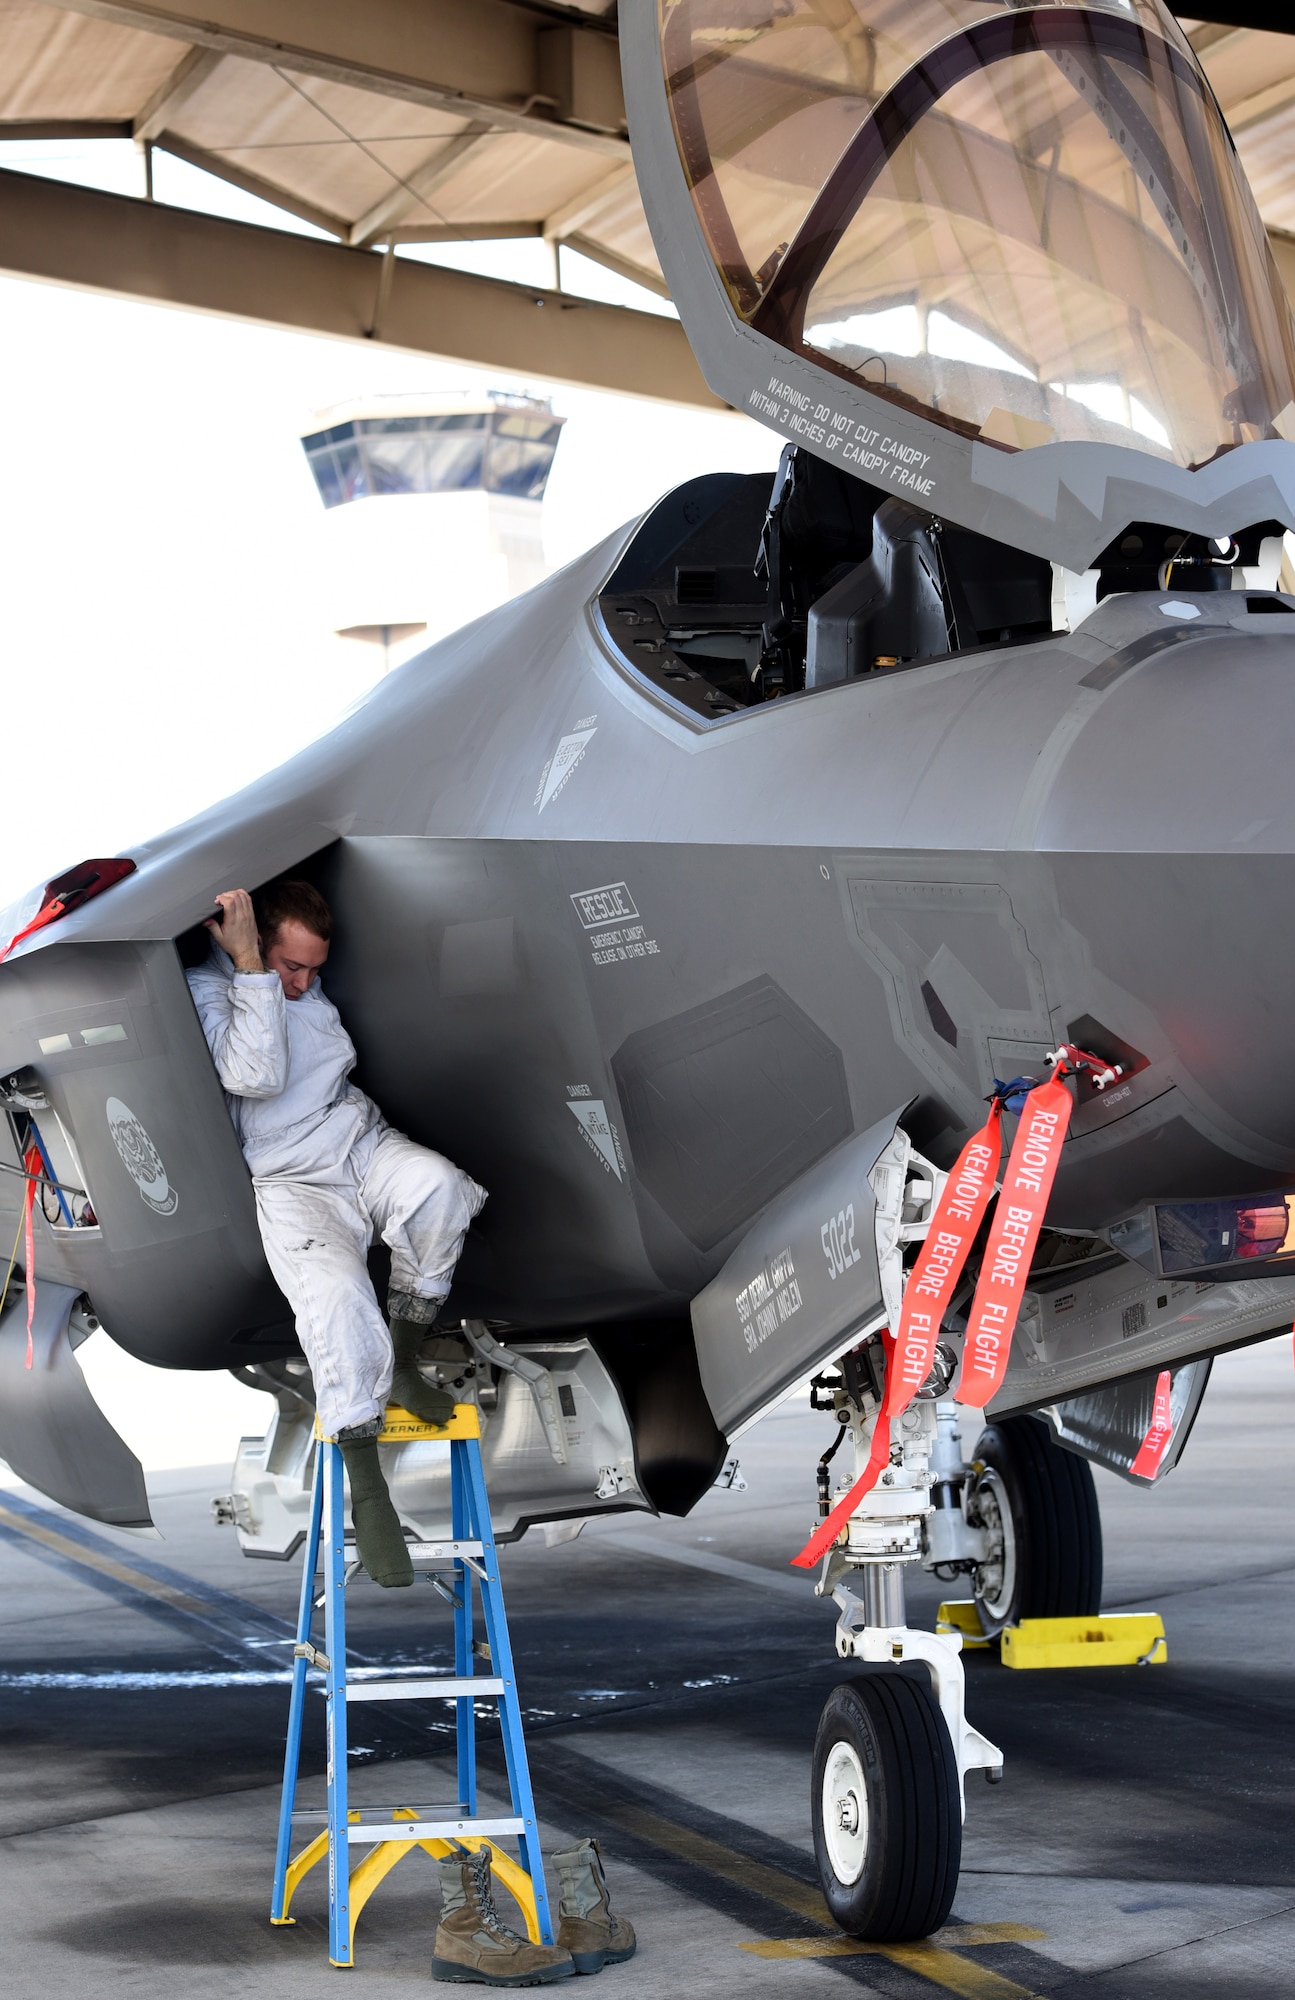 U.S. Air Force Senior Airman Zachary Weeks, 33d Aircraft Maintenance Squadron F-35A crew chief, exits an F-35A Lightning II intake after completing a post flight inspection during Checkered Flag 17-01, Dec. 8, 2016, at Tyndall Air Force Base, Florida. Checkered Flag facilitates integration between fifth and fourth-generation aircraft communities. These exercises are critical to hone the tactics techniques and procedures (TTP’s) for the aircraft’s inevitable deployment fighting alongside other combat assets. While the exercise is prime opportunity to learn about how we fly the aircraft, it presents the same learning opportunities for preventative and restorative maintenance. (U.S. Air Force photo by Staff Sgt. Peter Thompson)